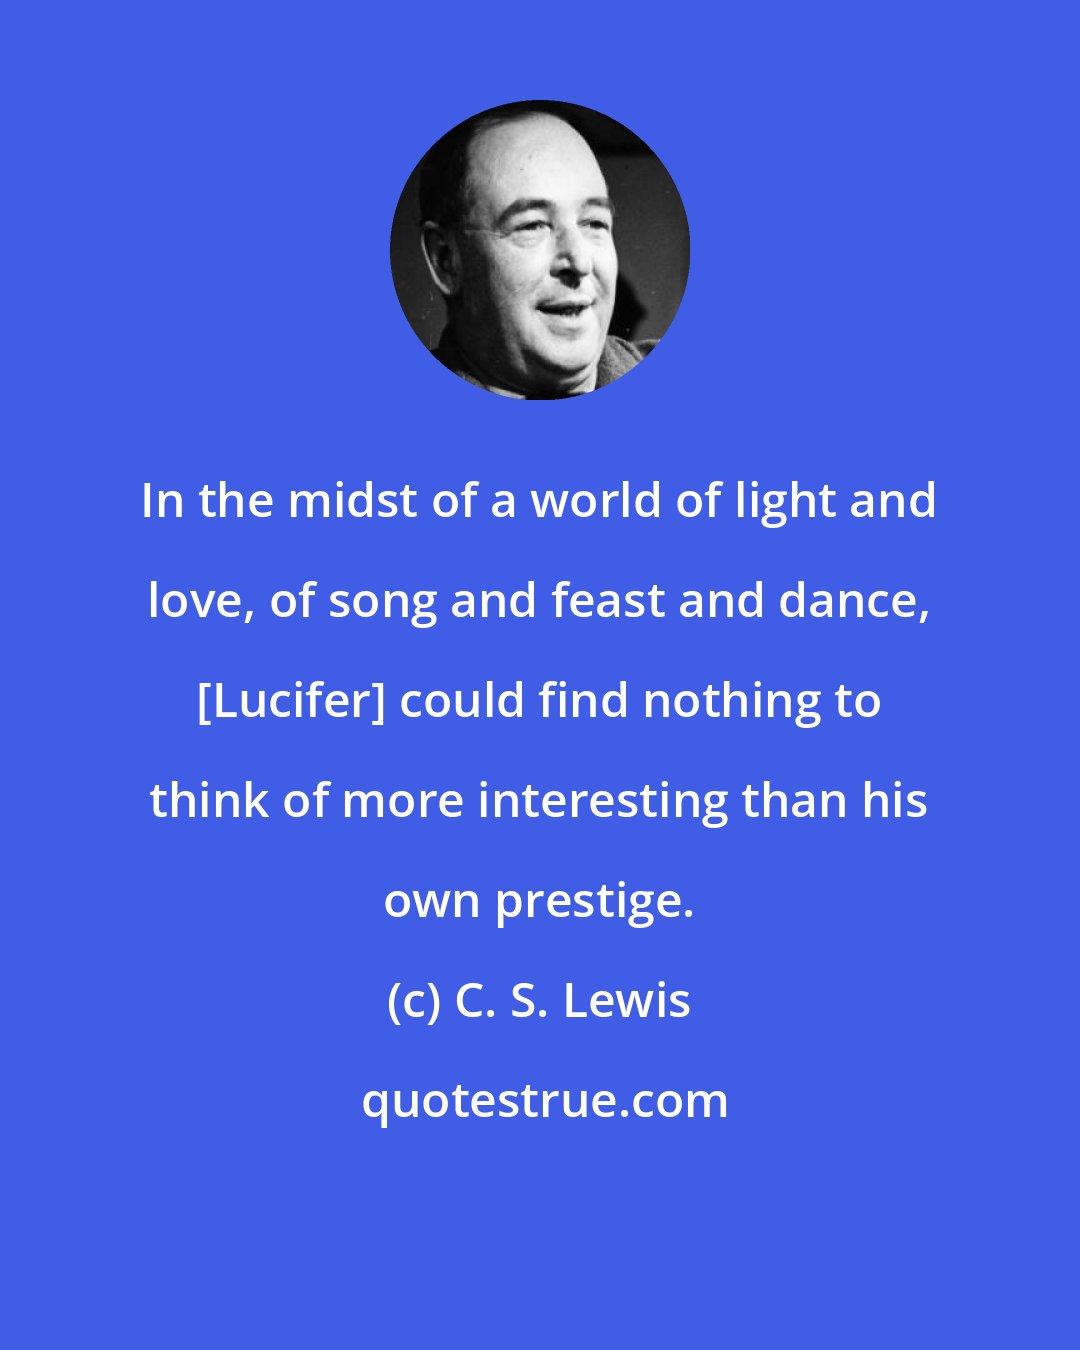 C. S. Lewis: In the midst of a world of light and love, of song and feast and dance, [Lucifer] could find nothing to think of more interesting than his own prestige.